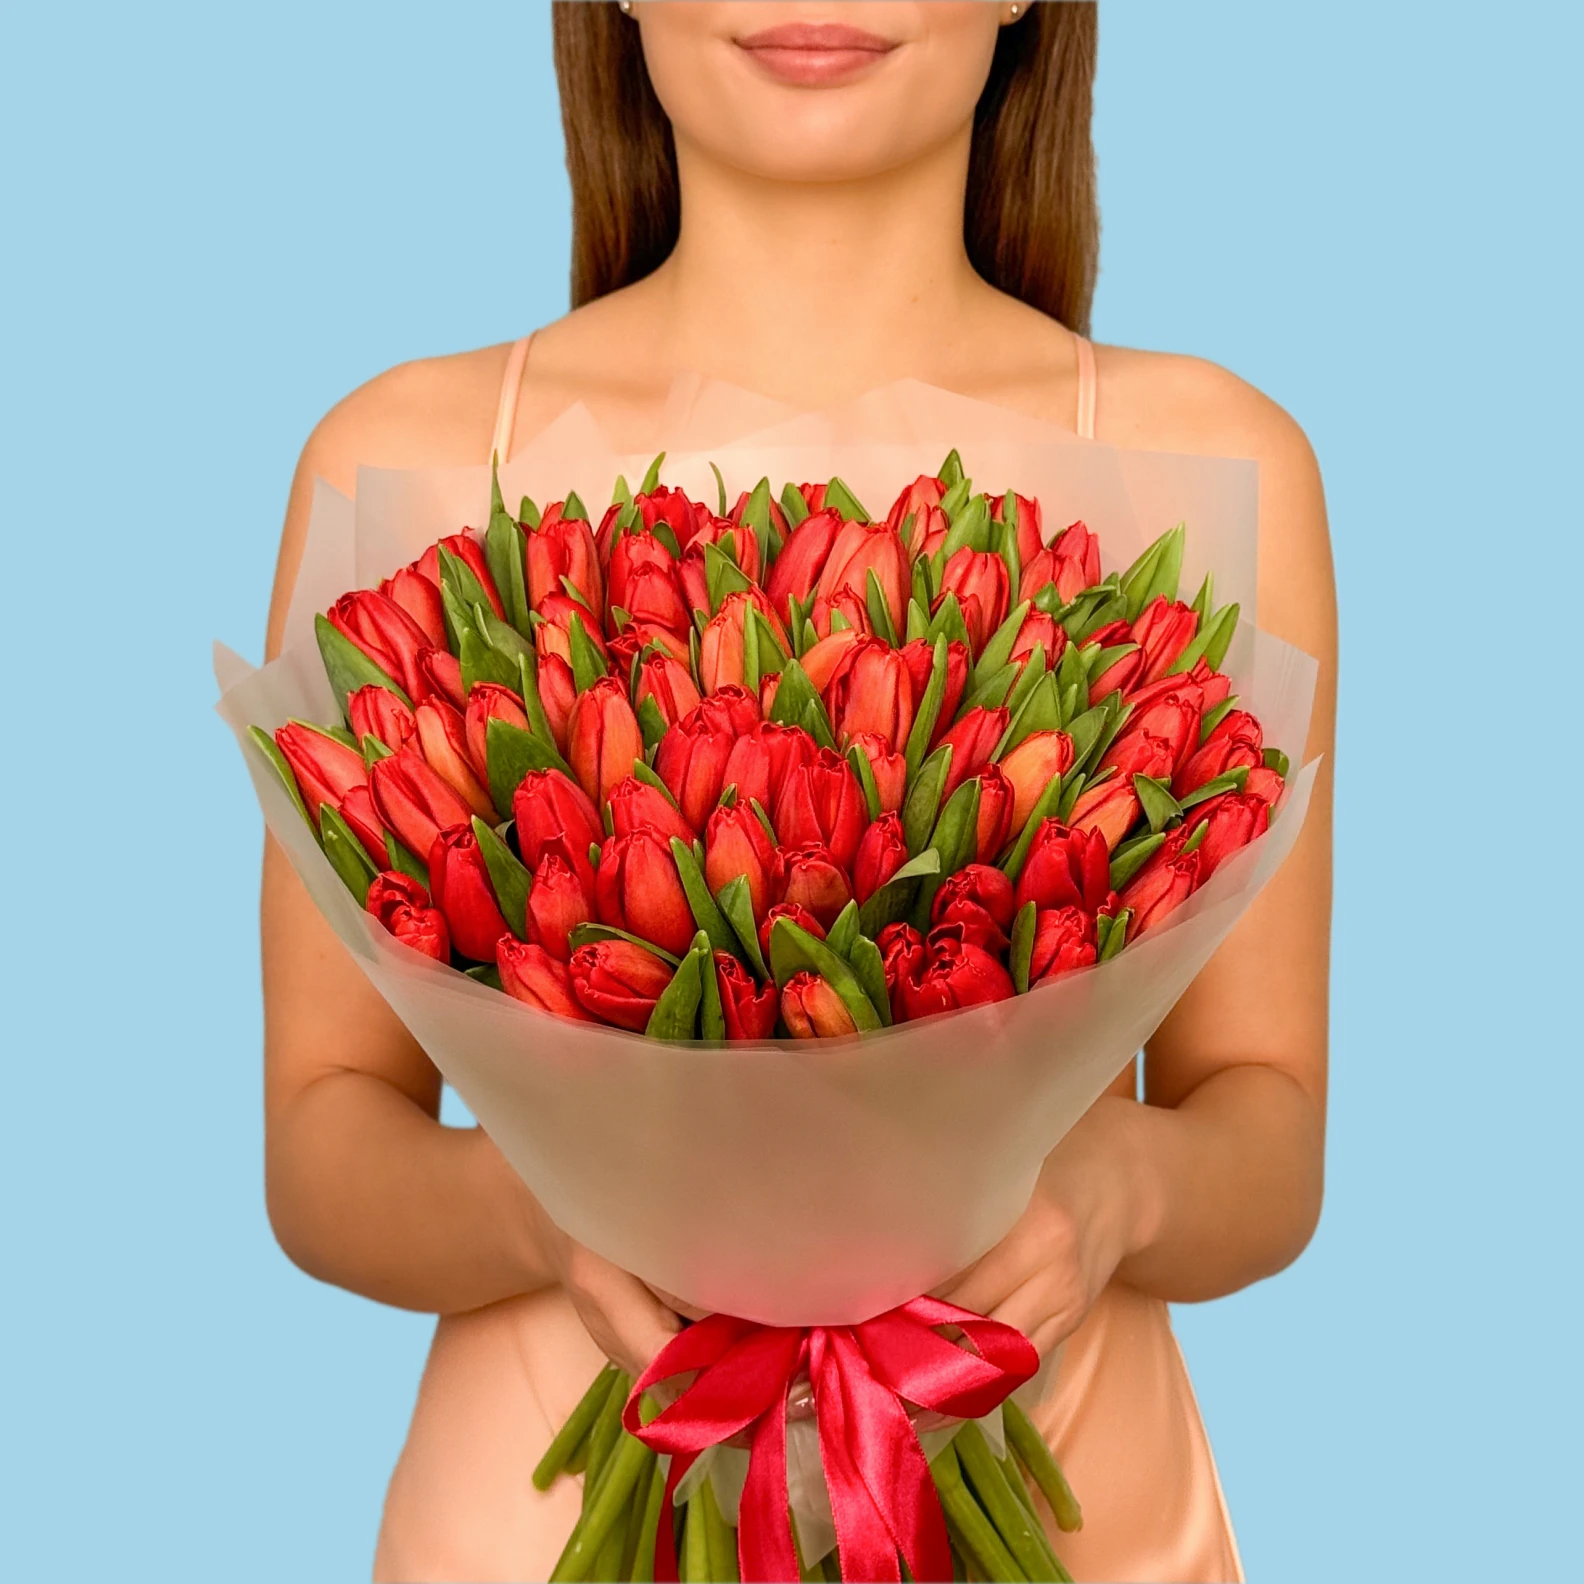 100 Red Tulips - image №1